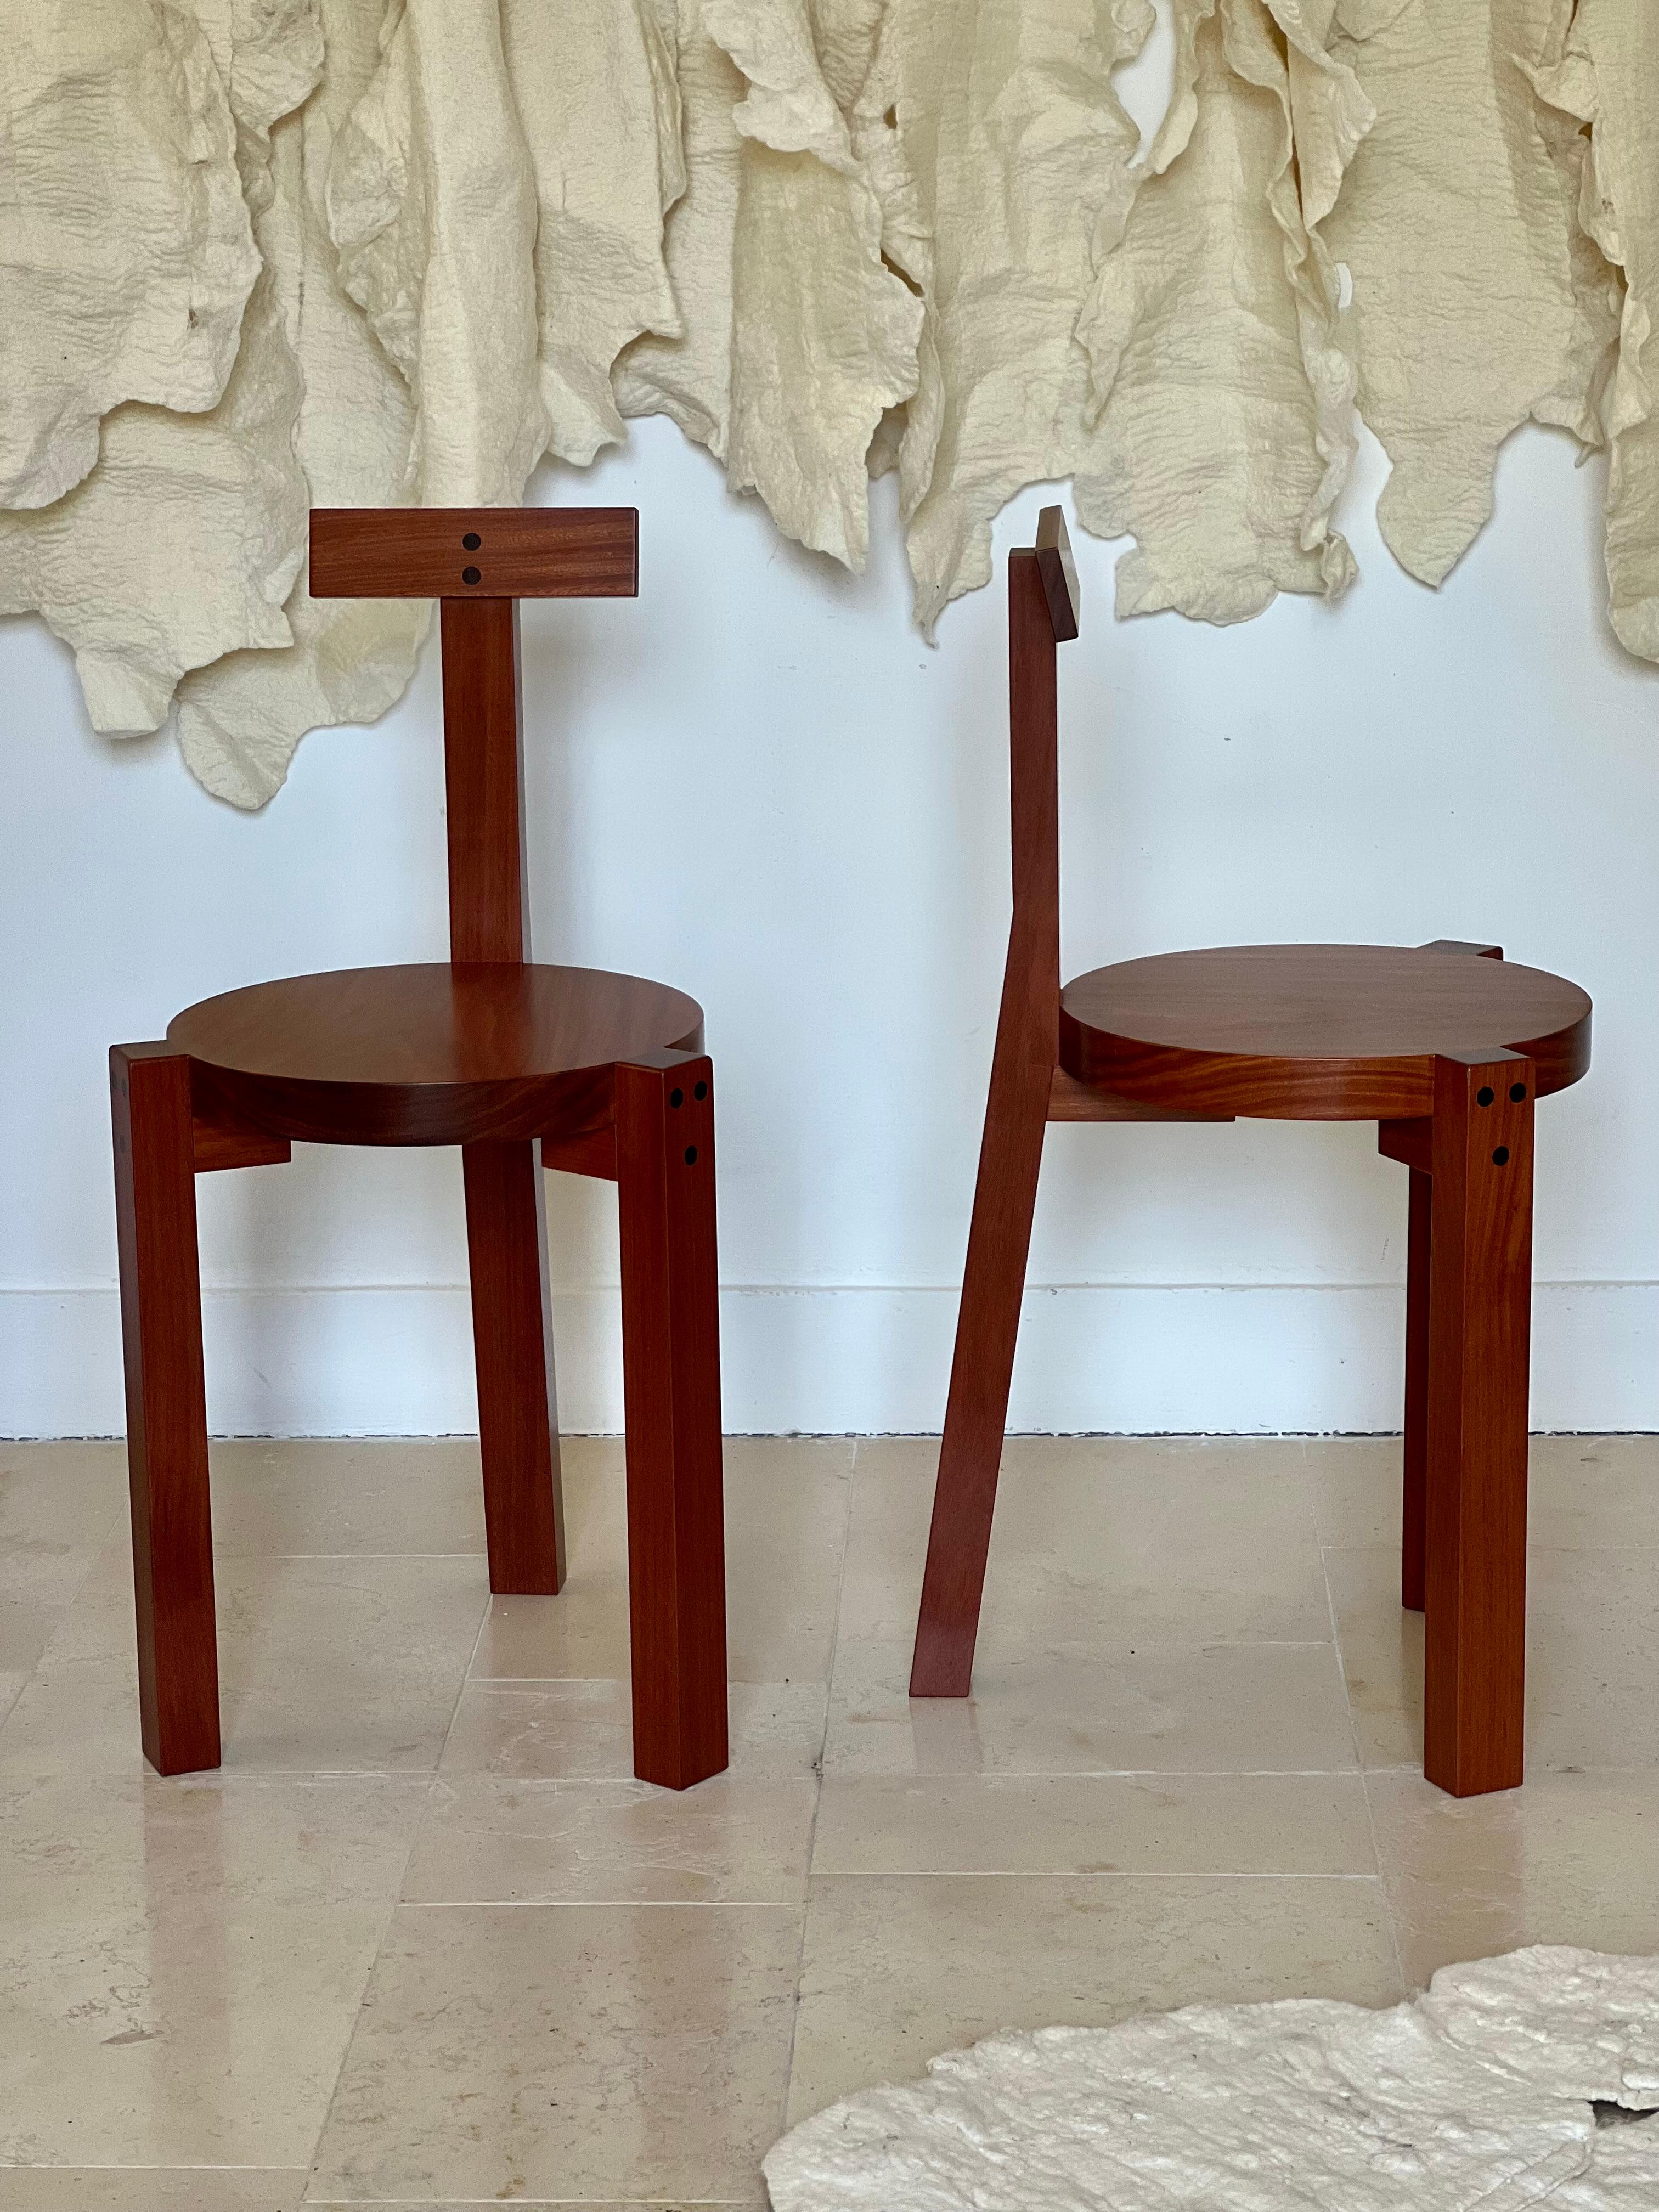 The Girafa chair, designed by Italian-Brazilian architect Lina Bo Bardi in 1986, is a distinctive piece of furniture that features a tall, slender backrest resembling a giraffe's neck. The chair is made from wood, and is supported by a tripod